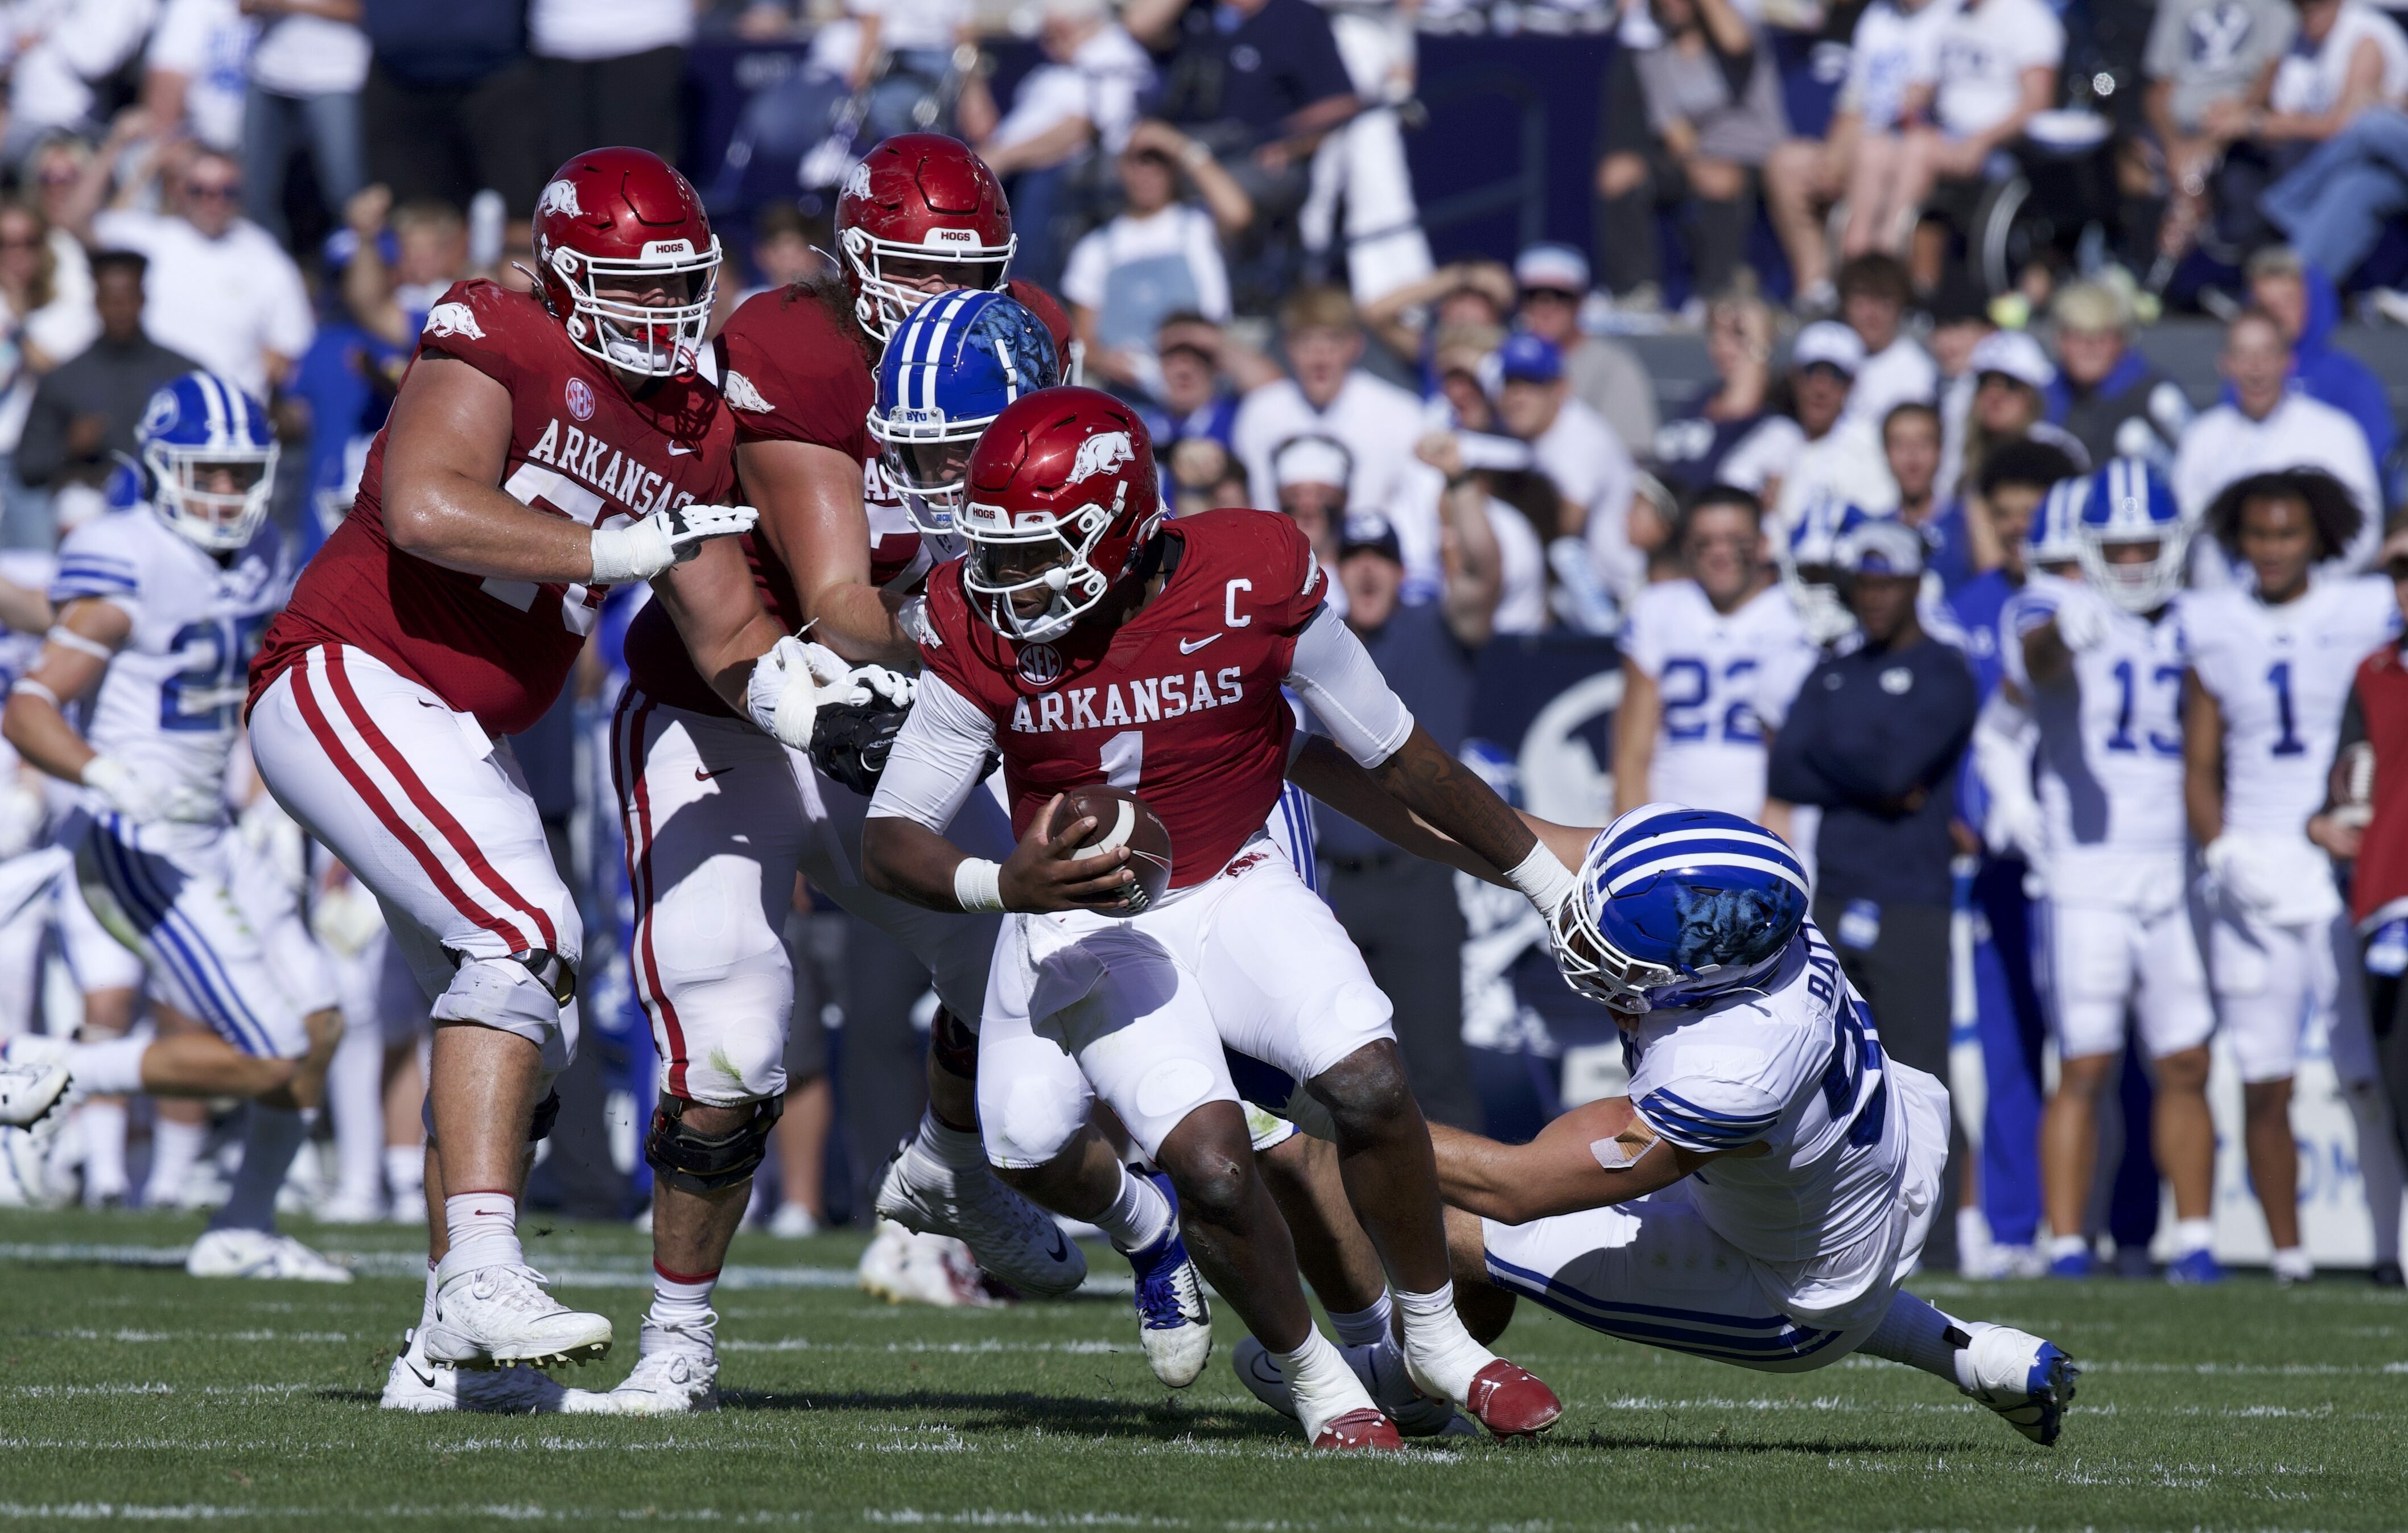 Cougar defense collapses as Arkansas stomps BYU 5235 The Daily Universe